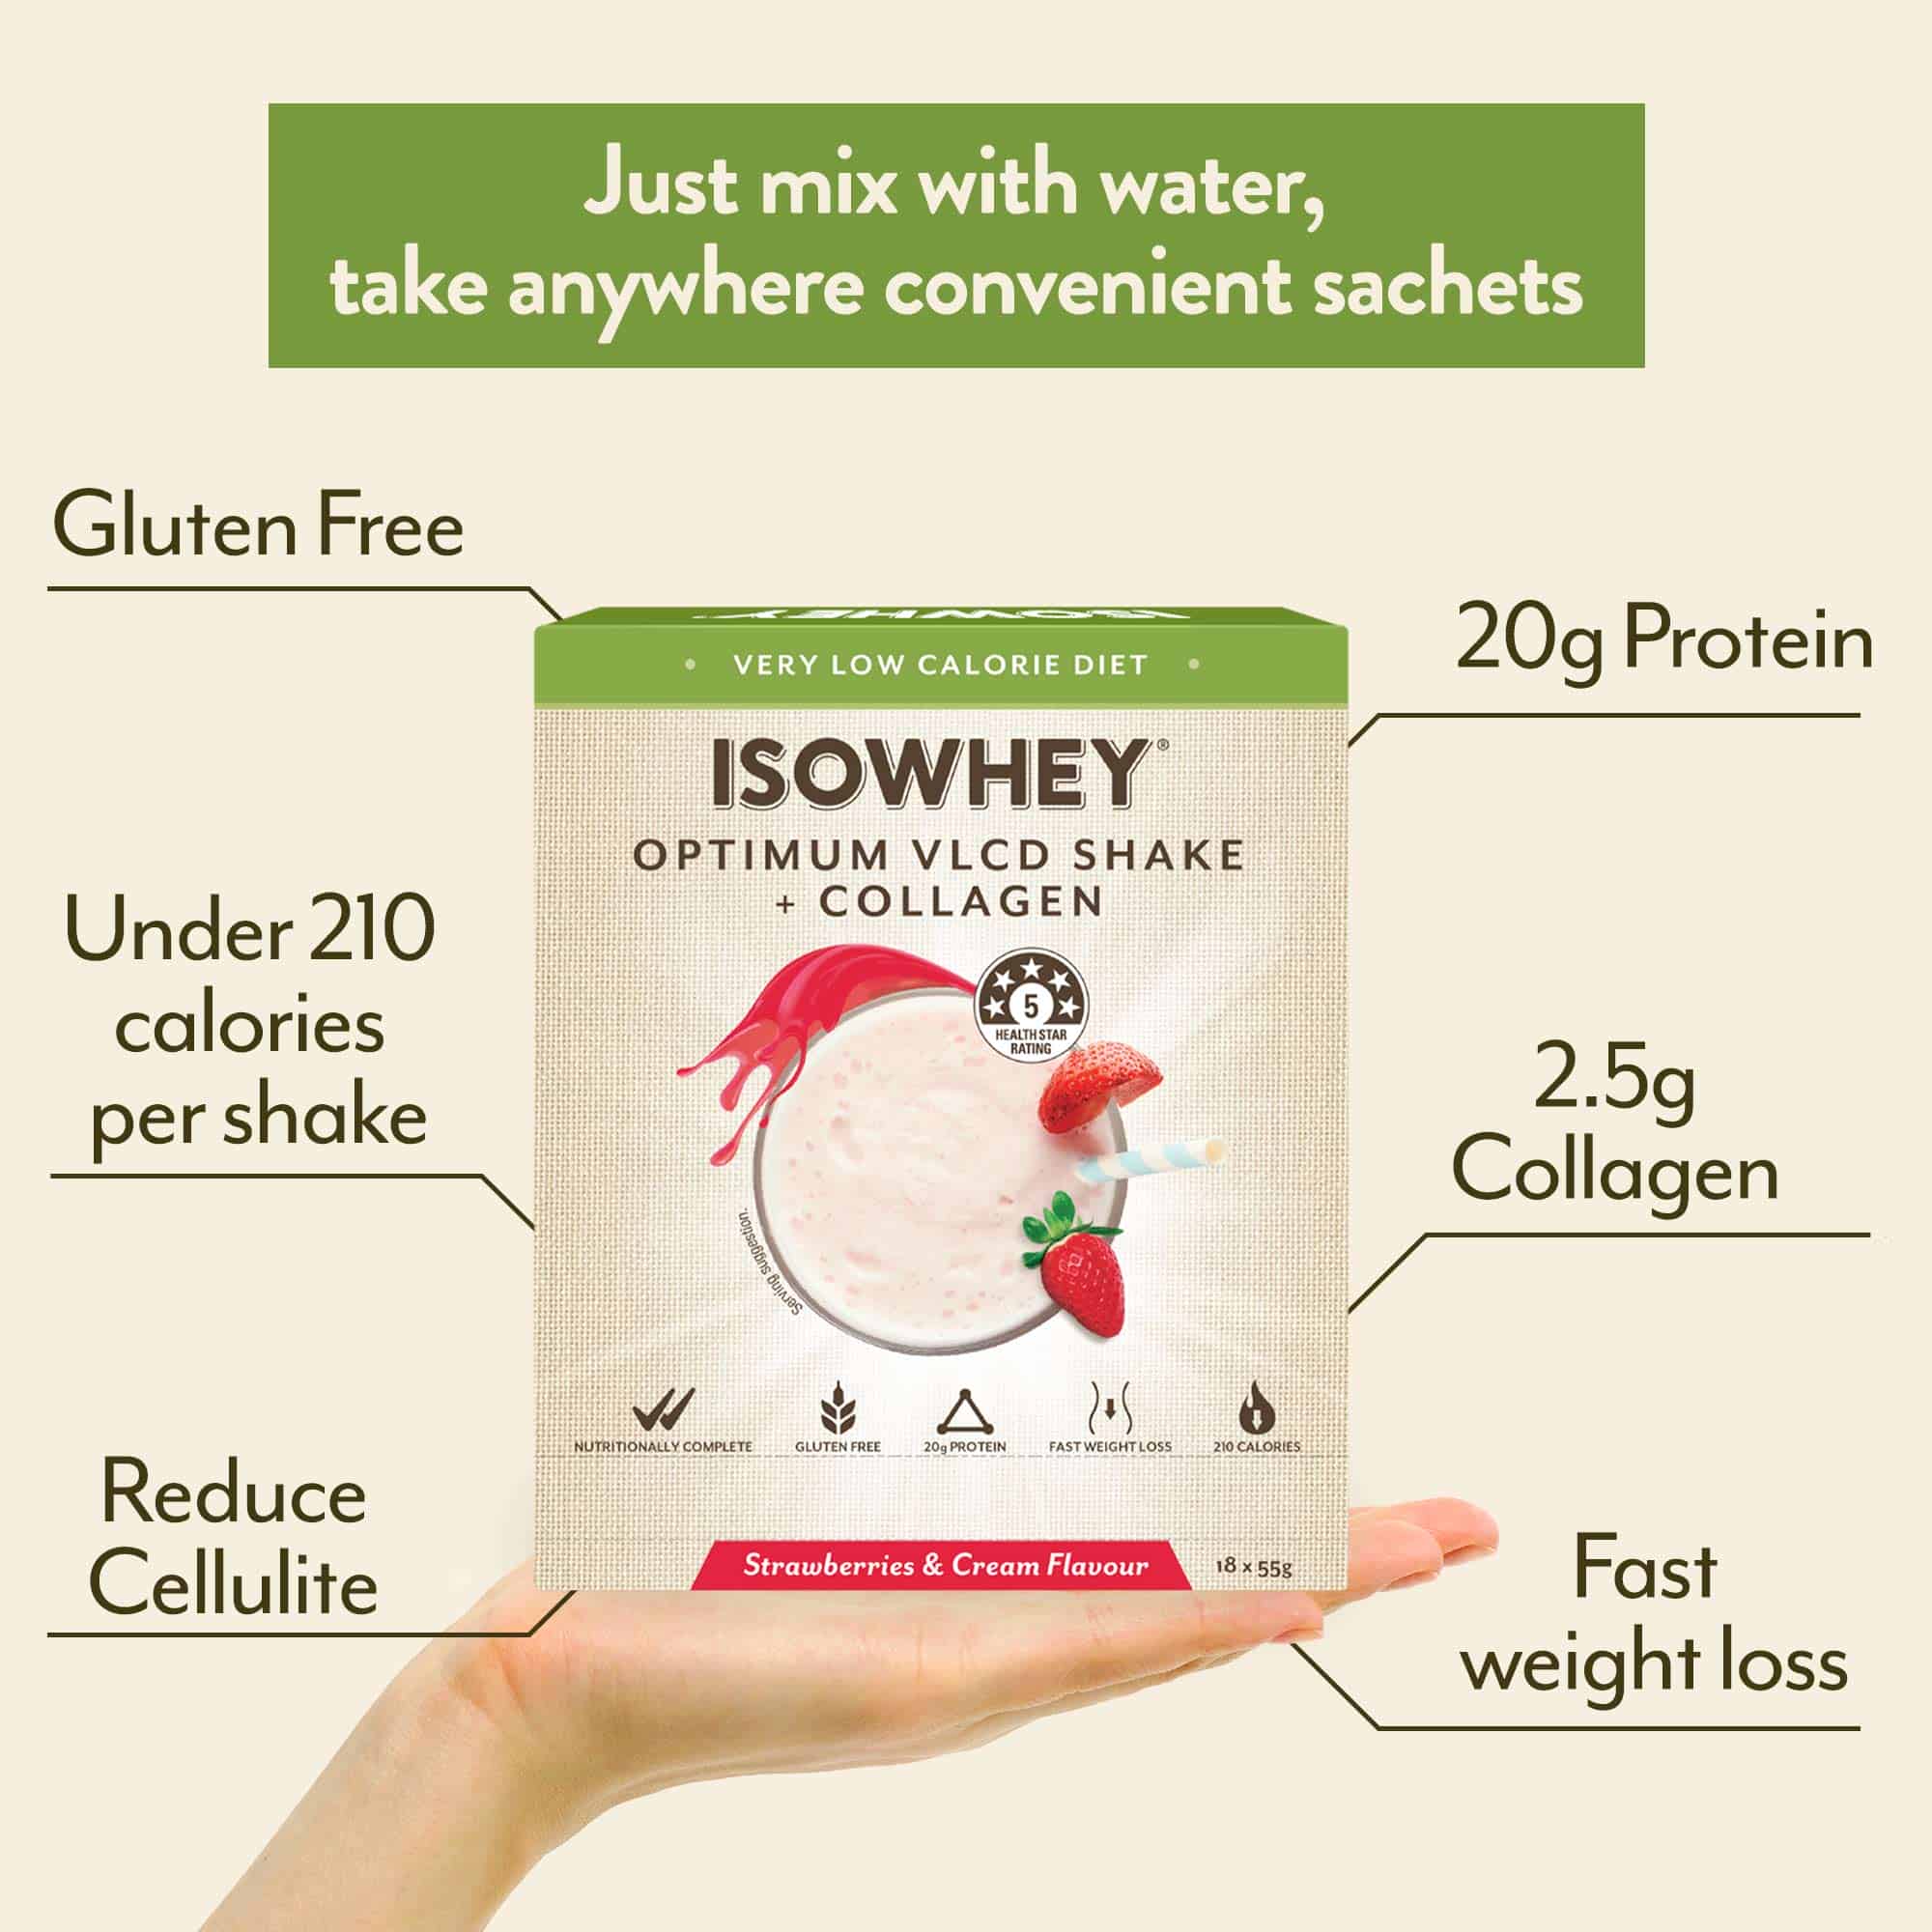 IsoWhey's Strawberry-flavored Optimum VLCD to help reduce cellulite